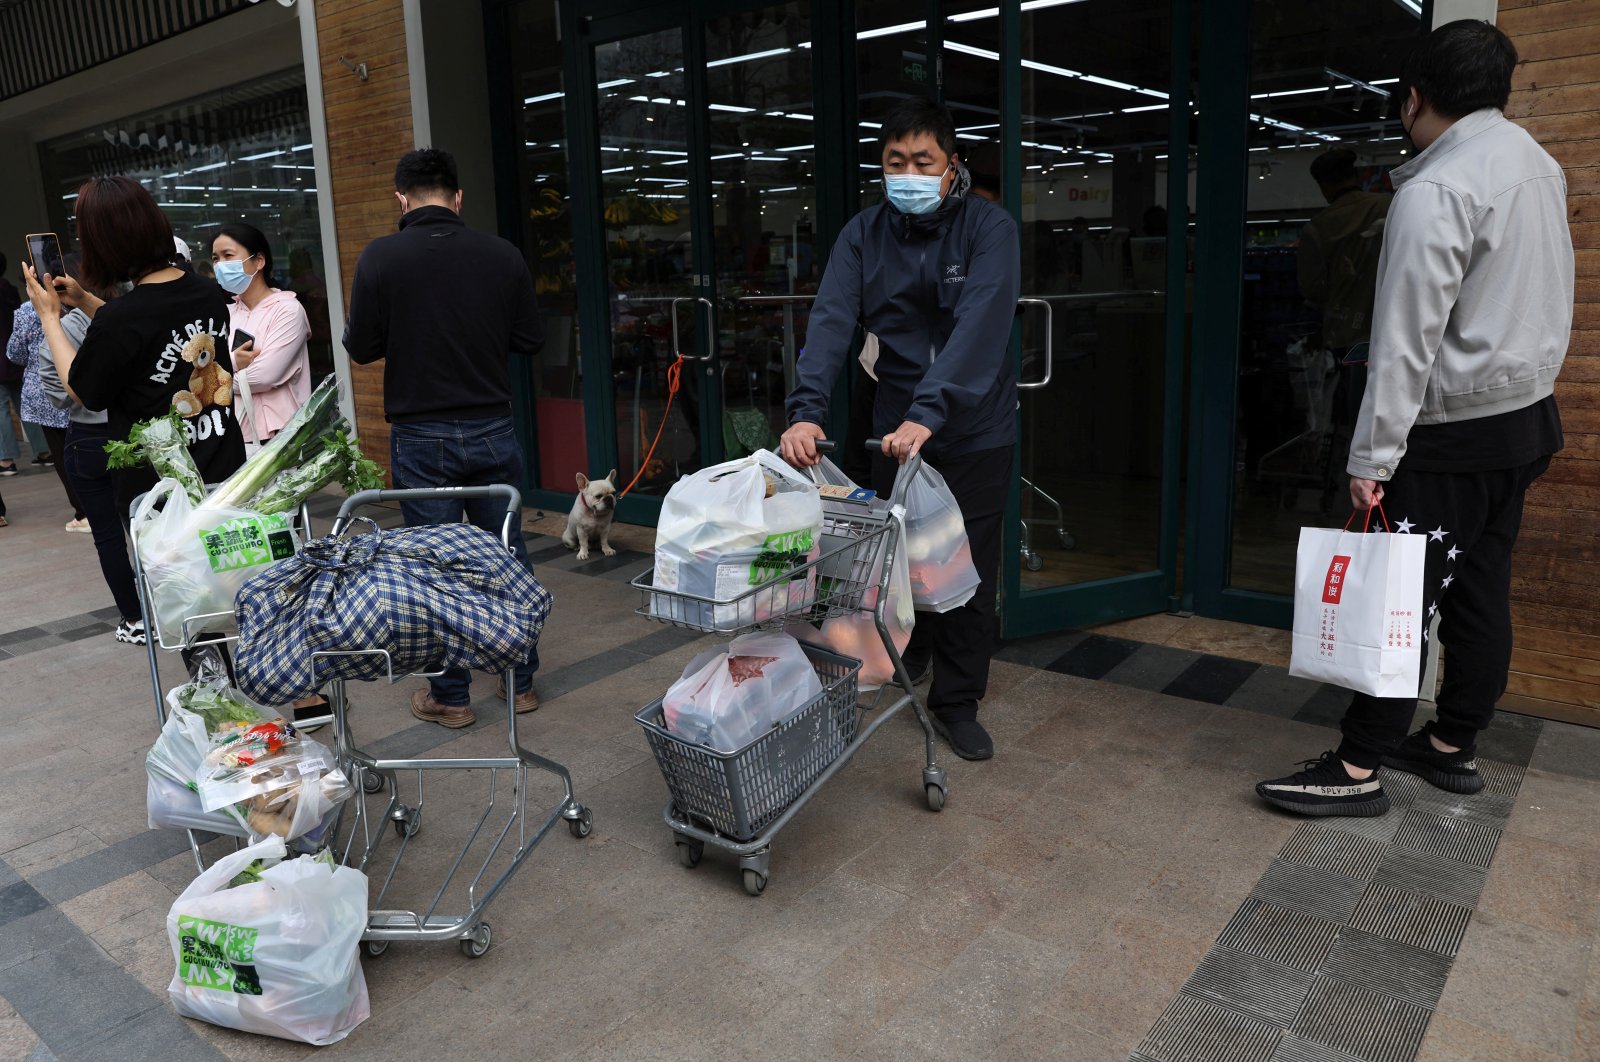 A customer pushes a cart carrying bags of goods as he leaves a supermarket in Beijing, China, April 25, 2022. (Reuters Photo)